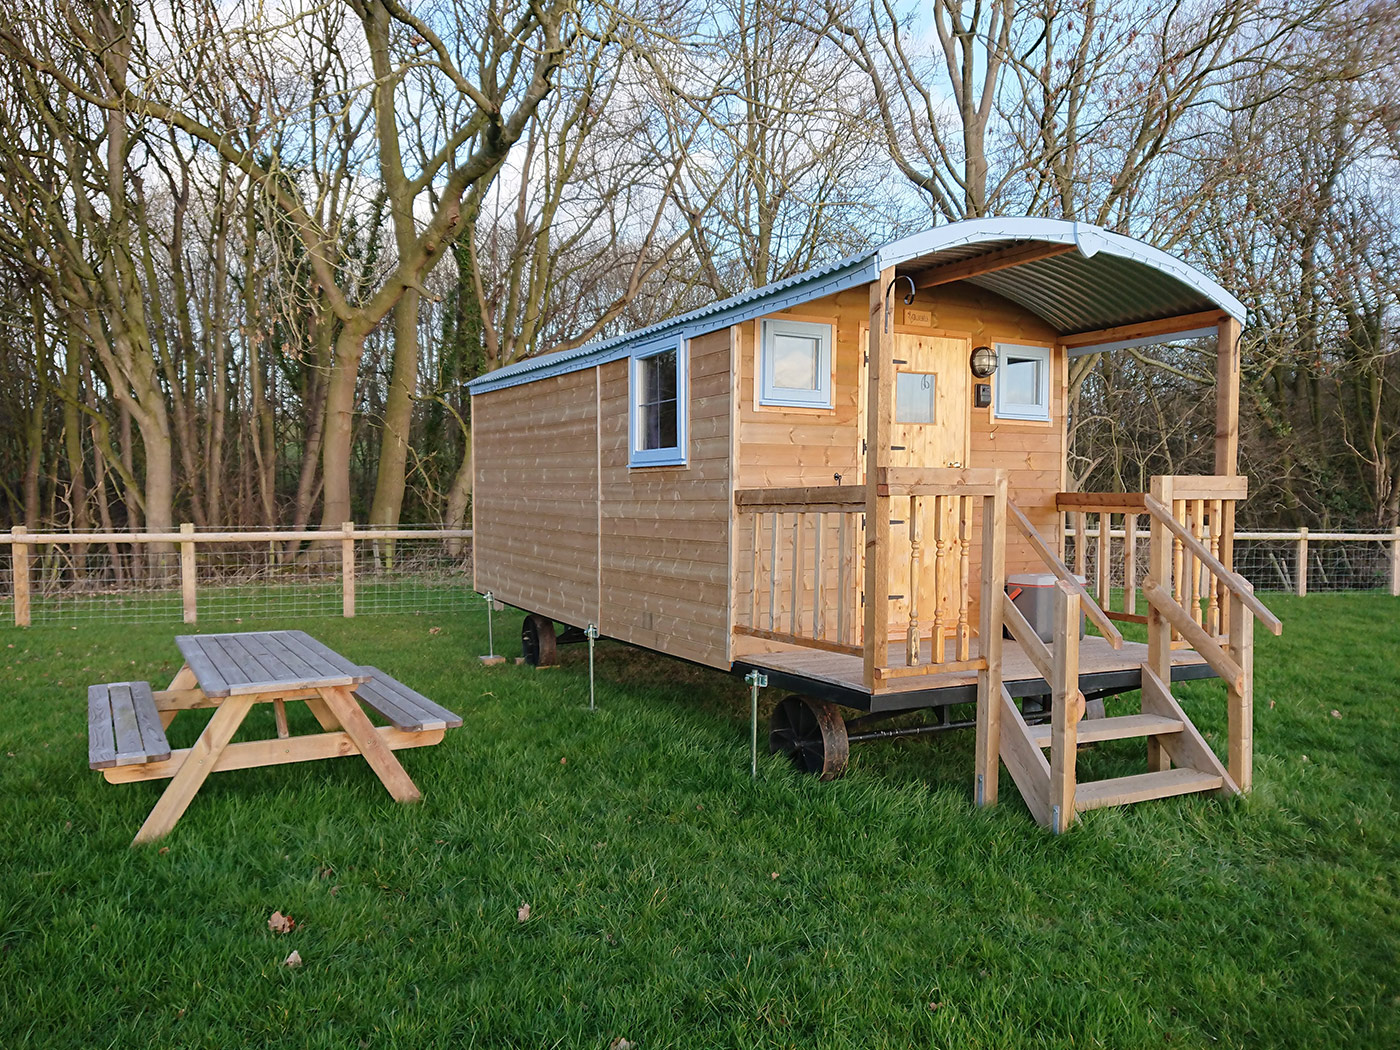 GLAMPING | A Relaxing Stay In A Cosy Shepherd’s Hut at Castle Farm Holidays, Shropshire